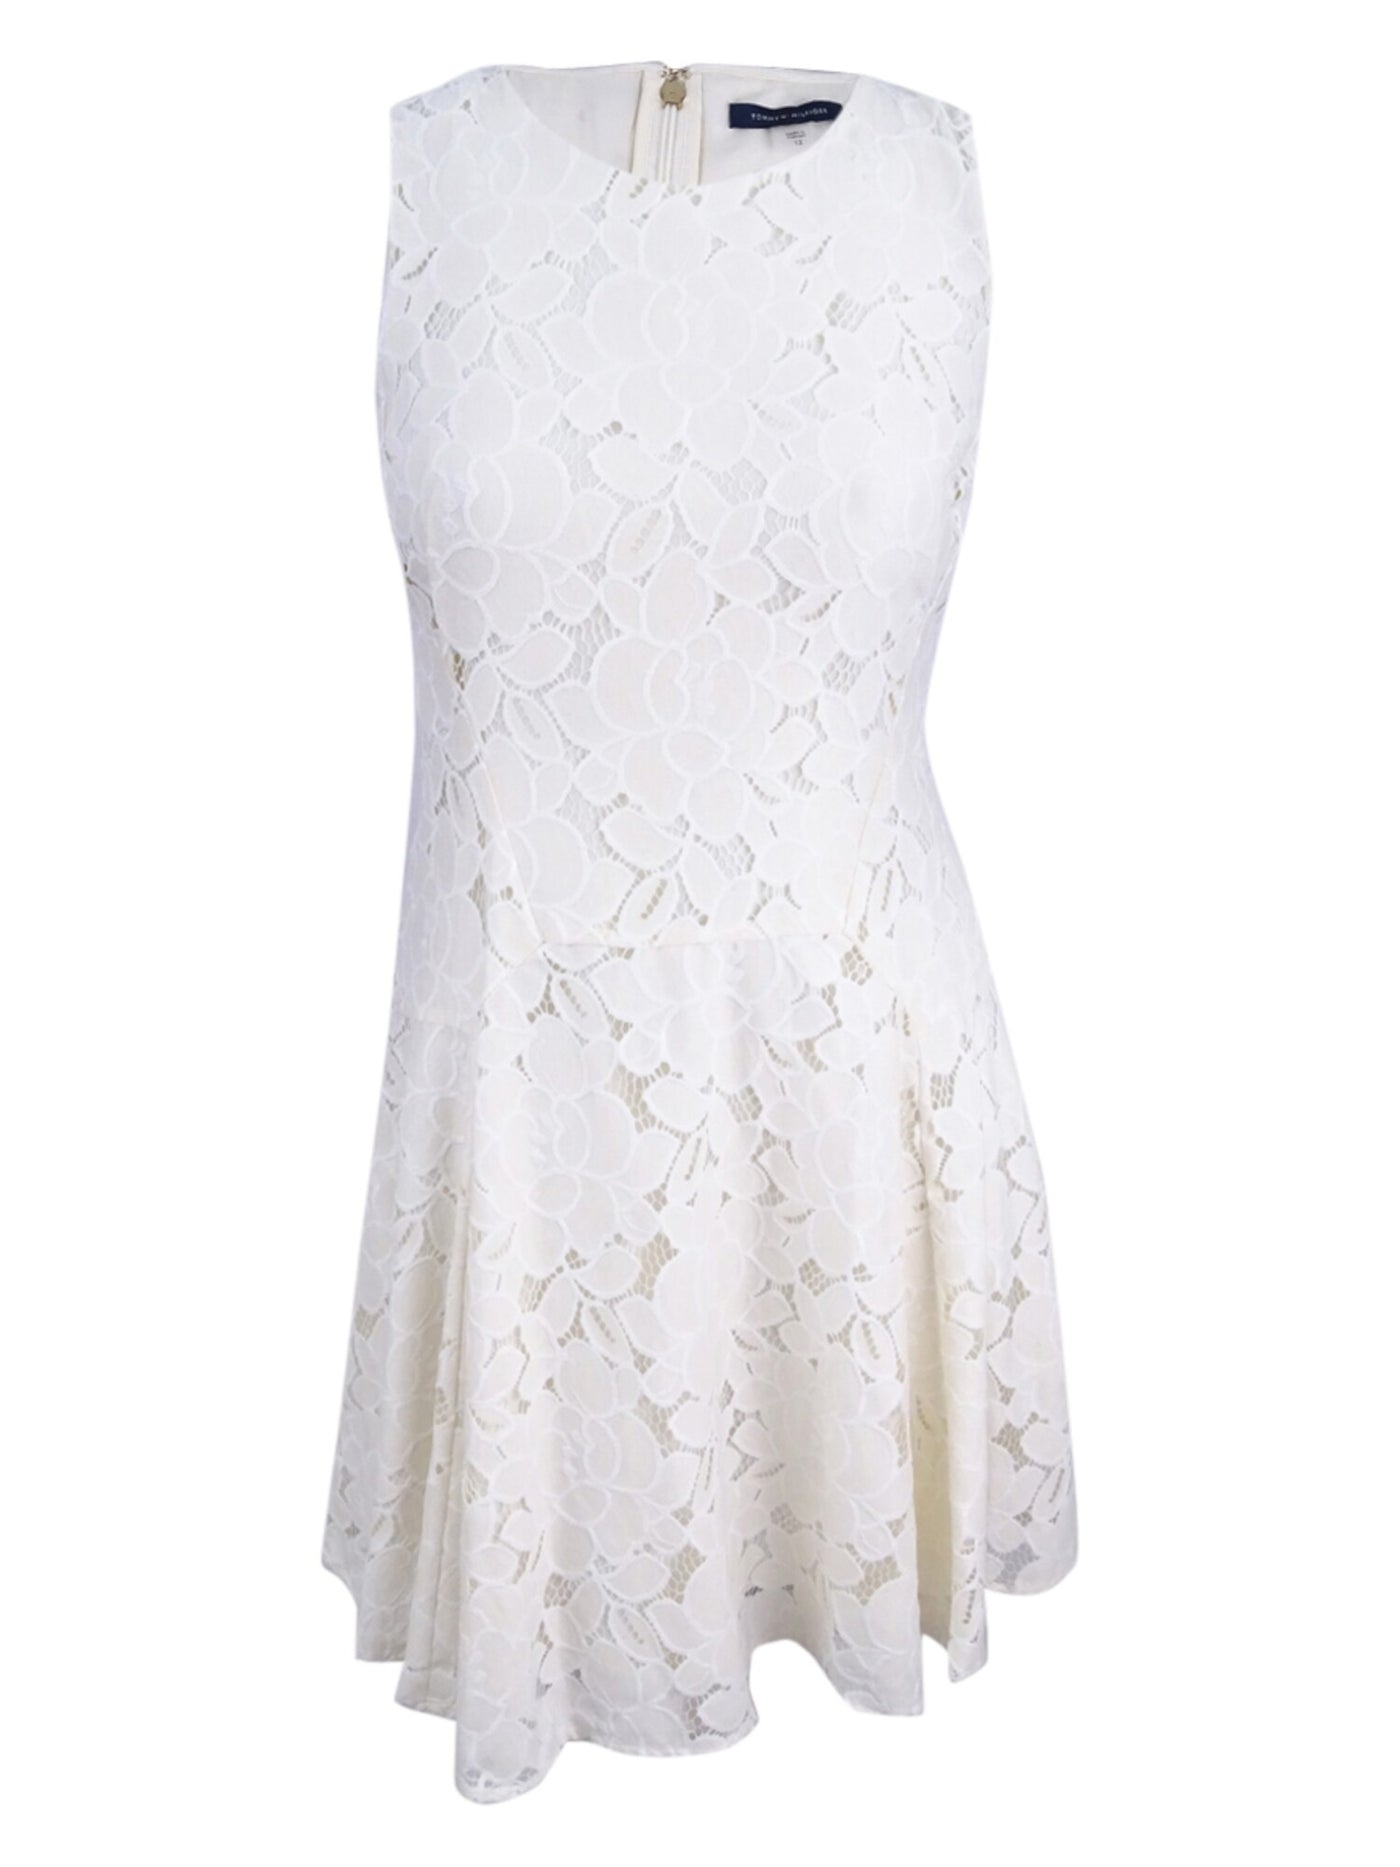 TOMMY HILFIGER Womens White Lace Zippered Lined Floral Sleeveless Jewel Neck Above The Knee Evening Shift Dress 8